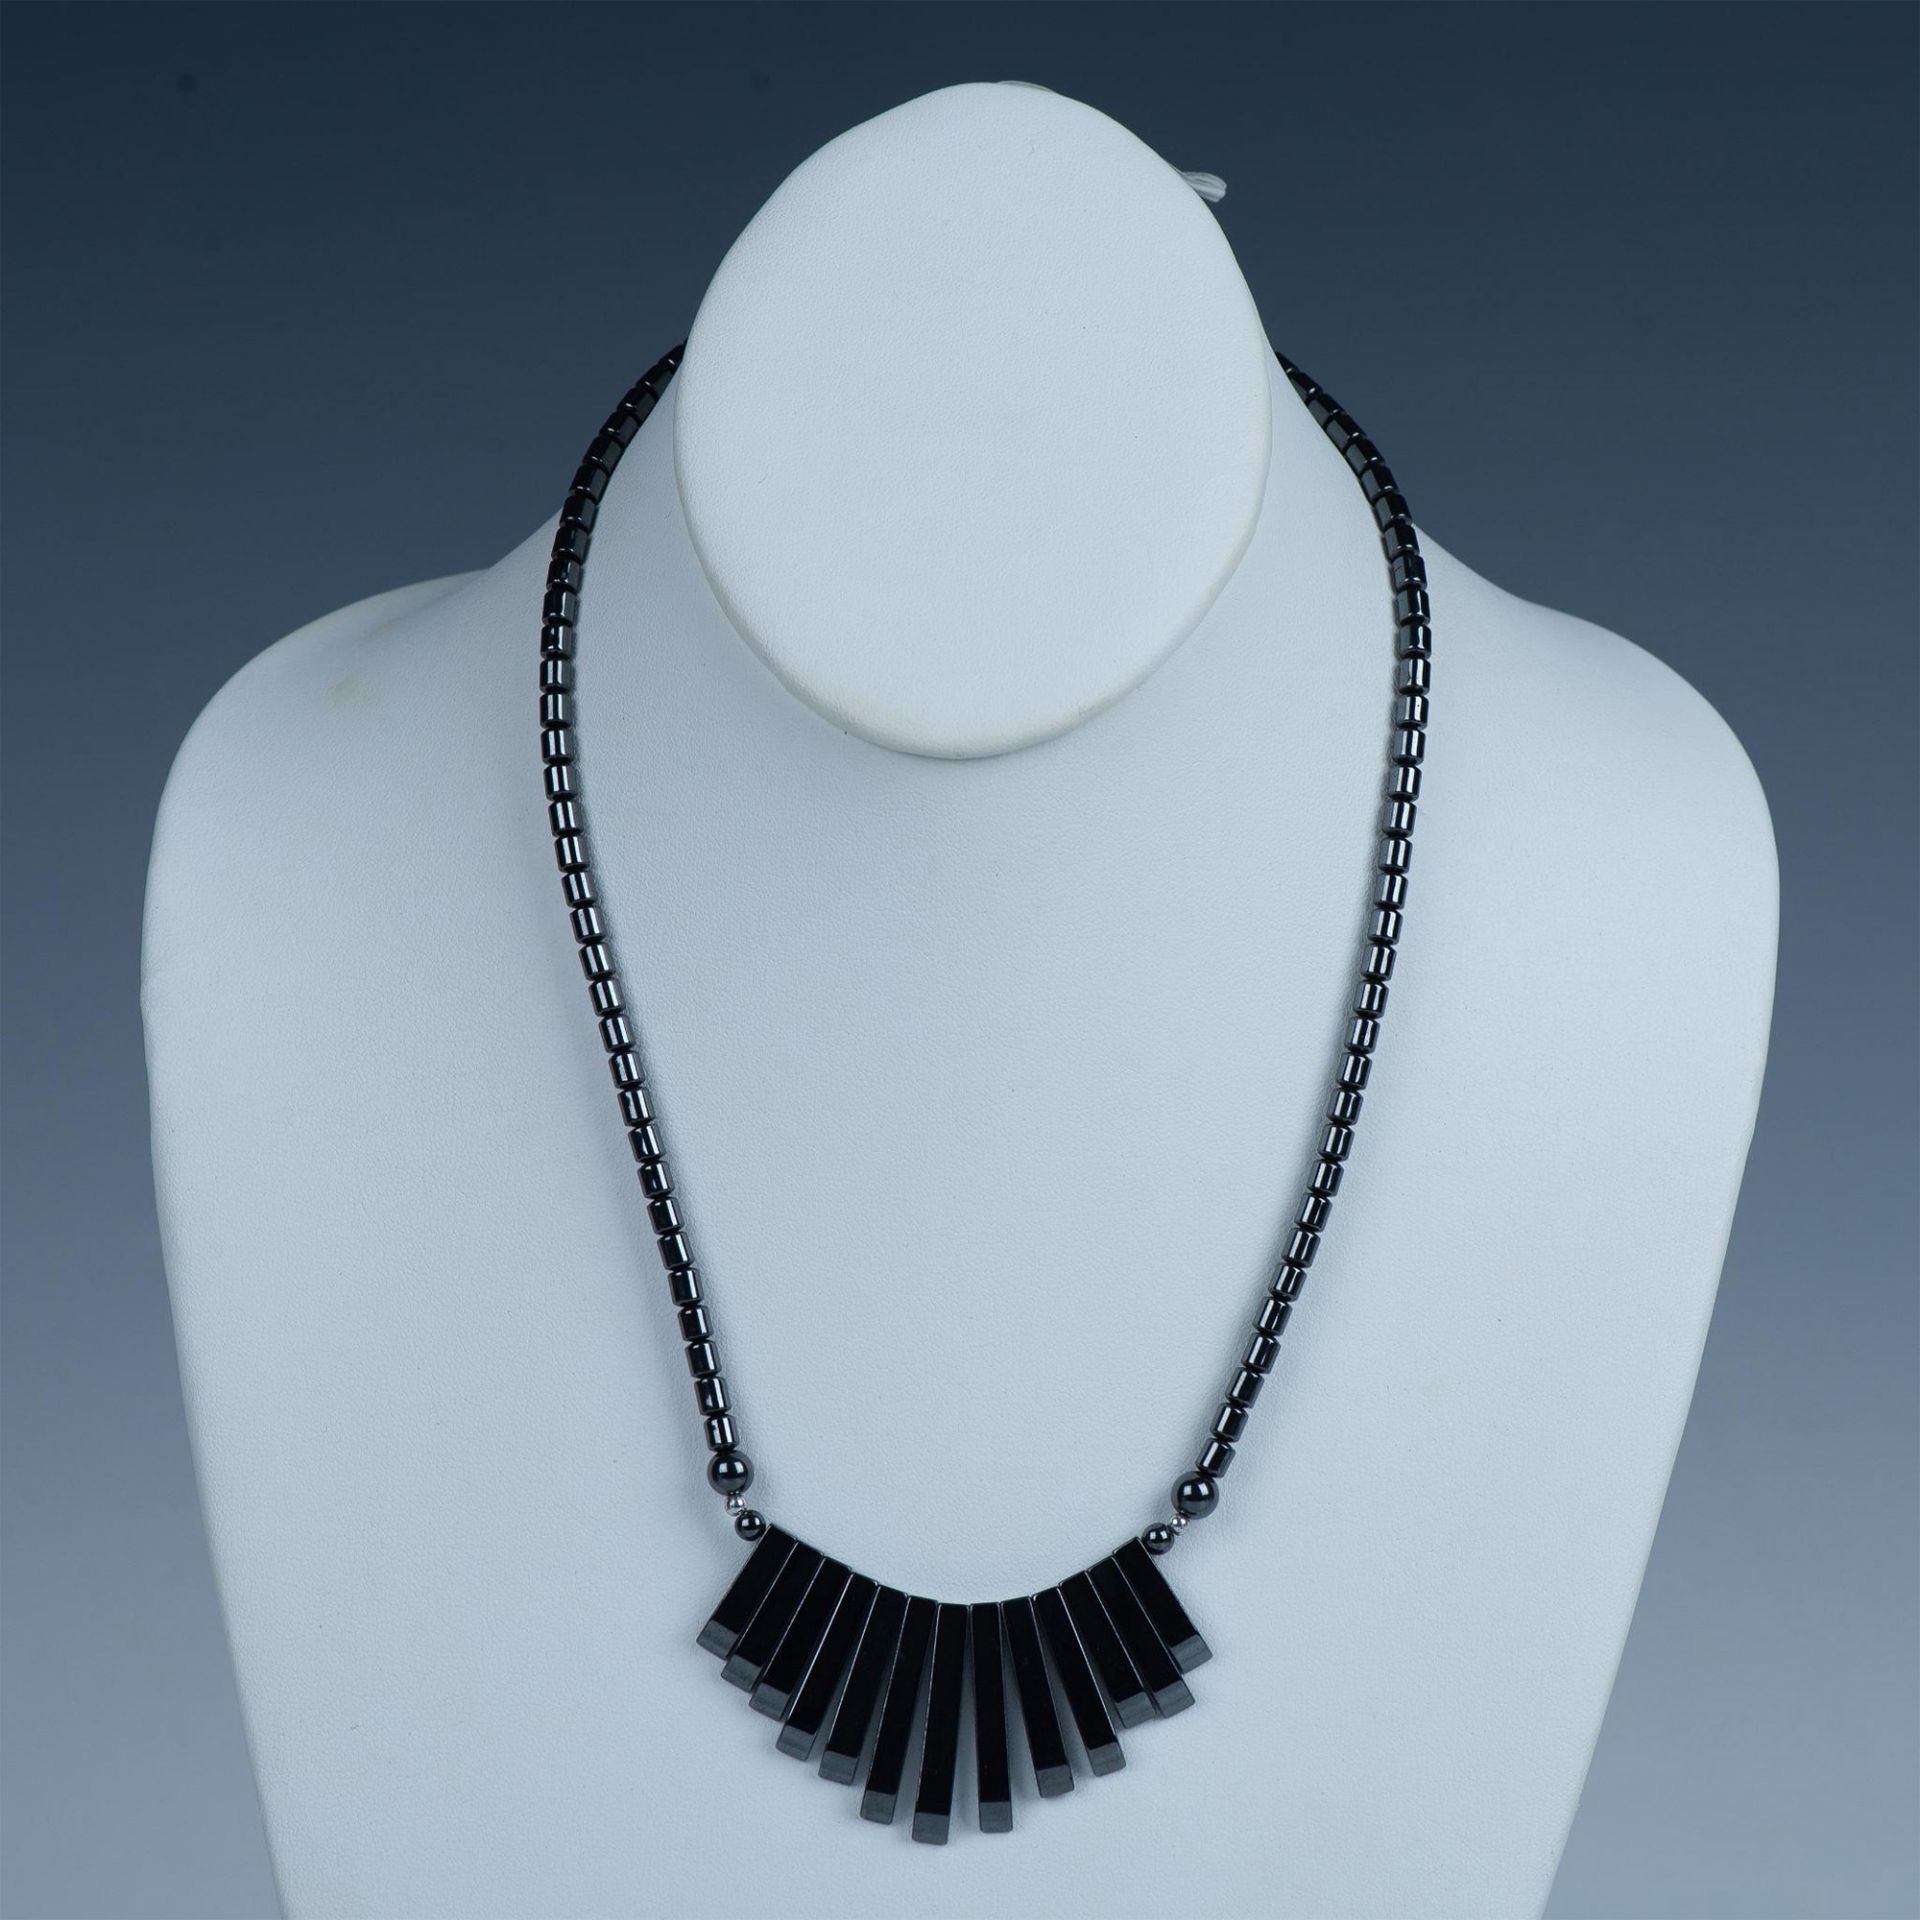 Hand Crafted Hematite Bead Necklace - Image 2 of 5